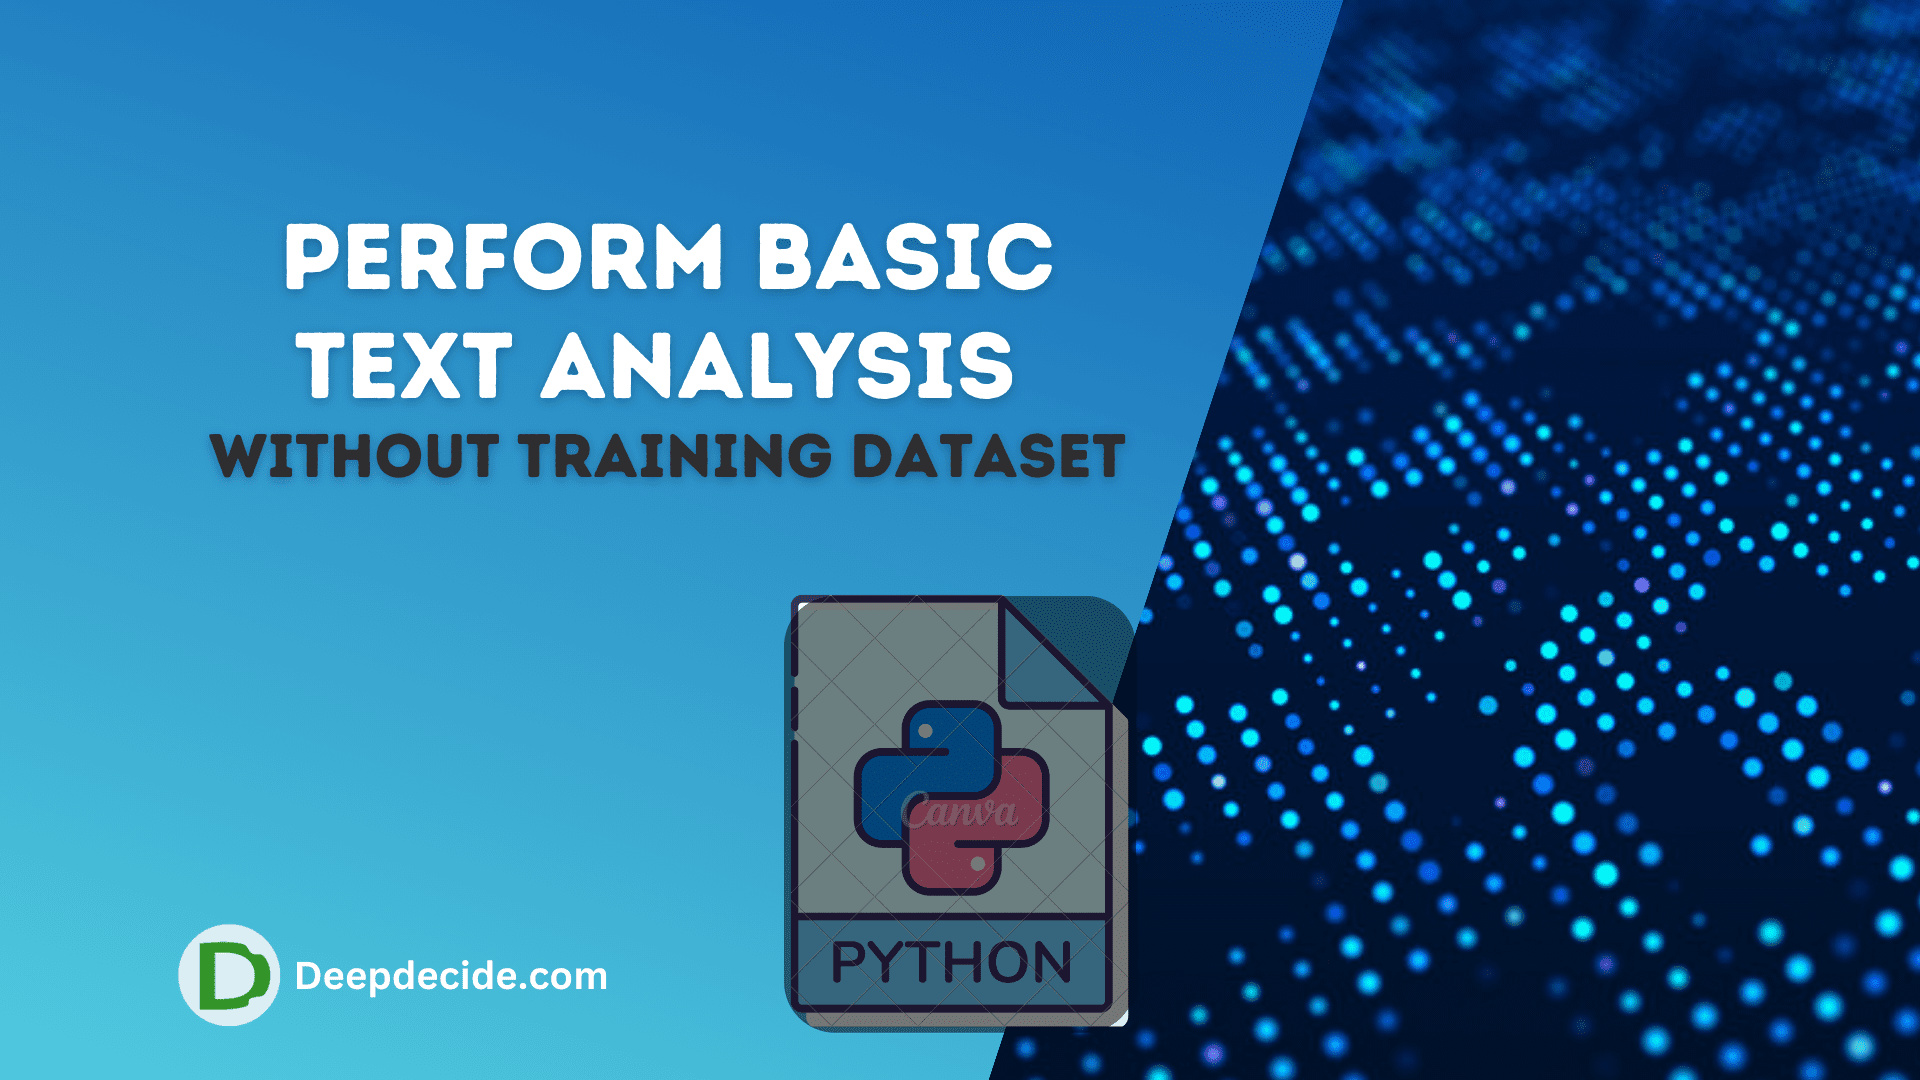 How to Perform Basic Text Analysis without Training Dataset